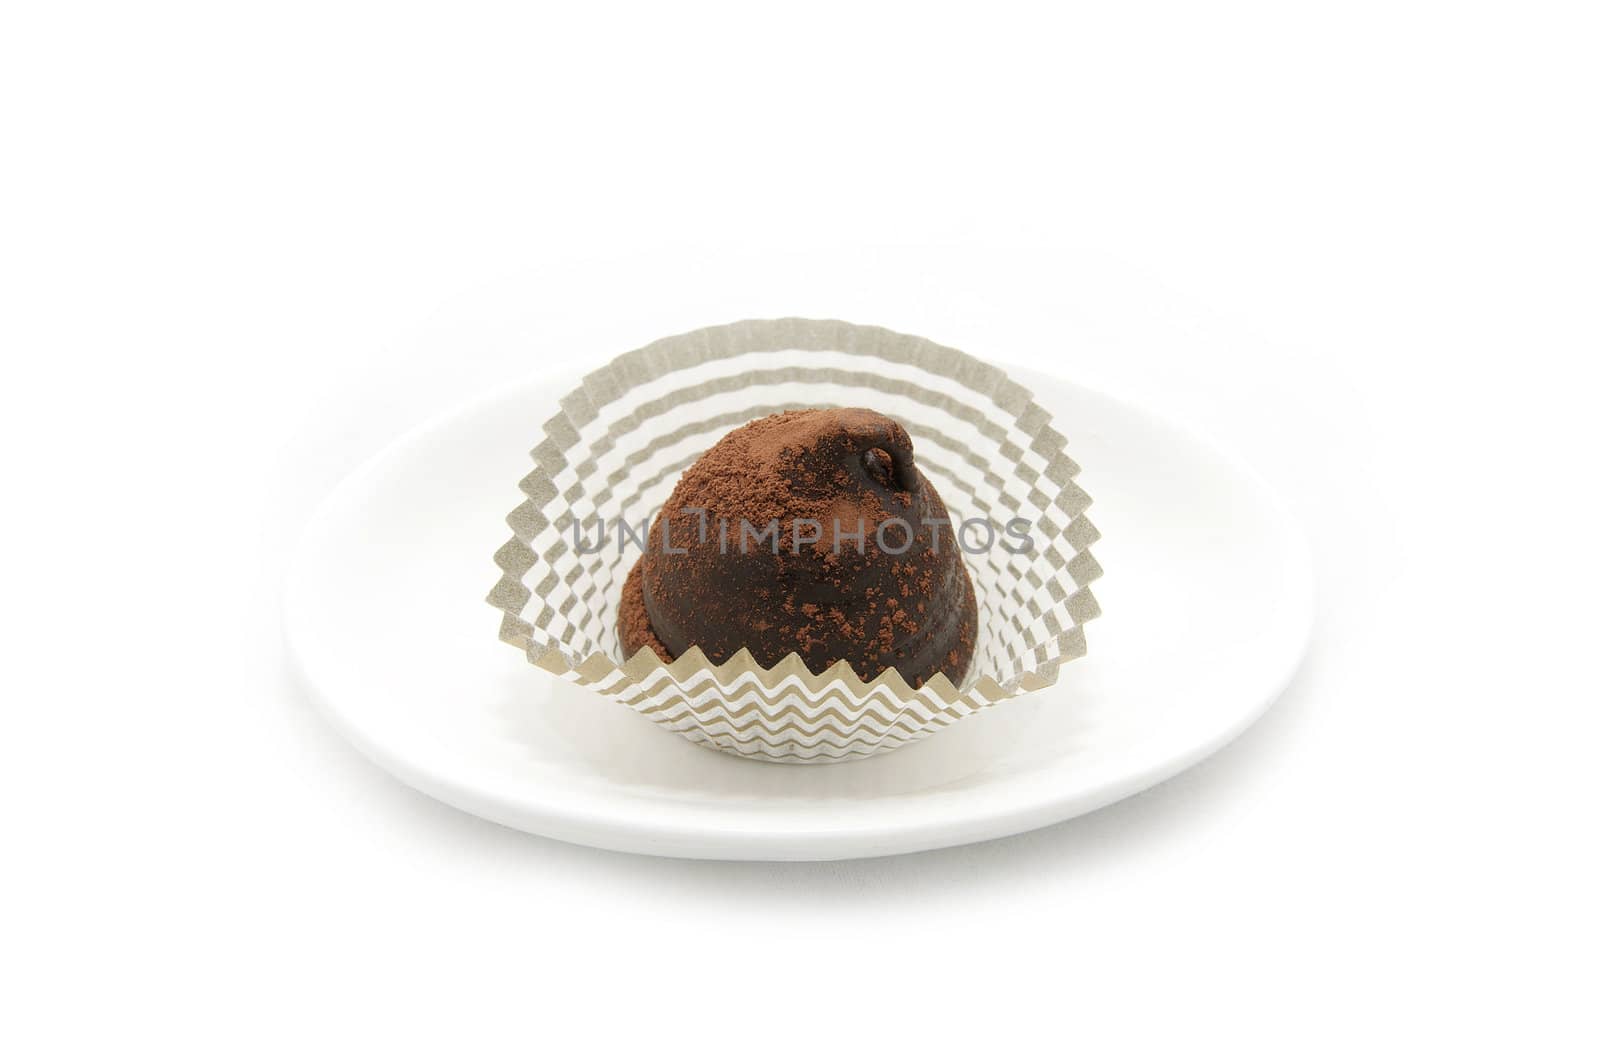 chocolate candy in the package on a white background